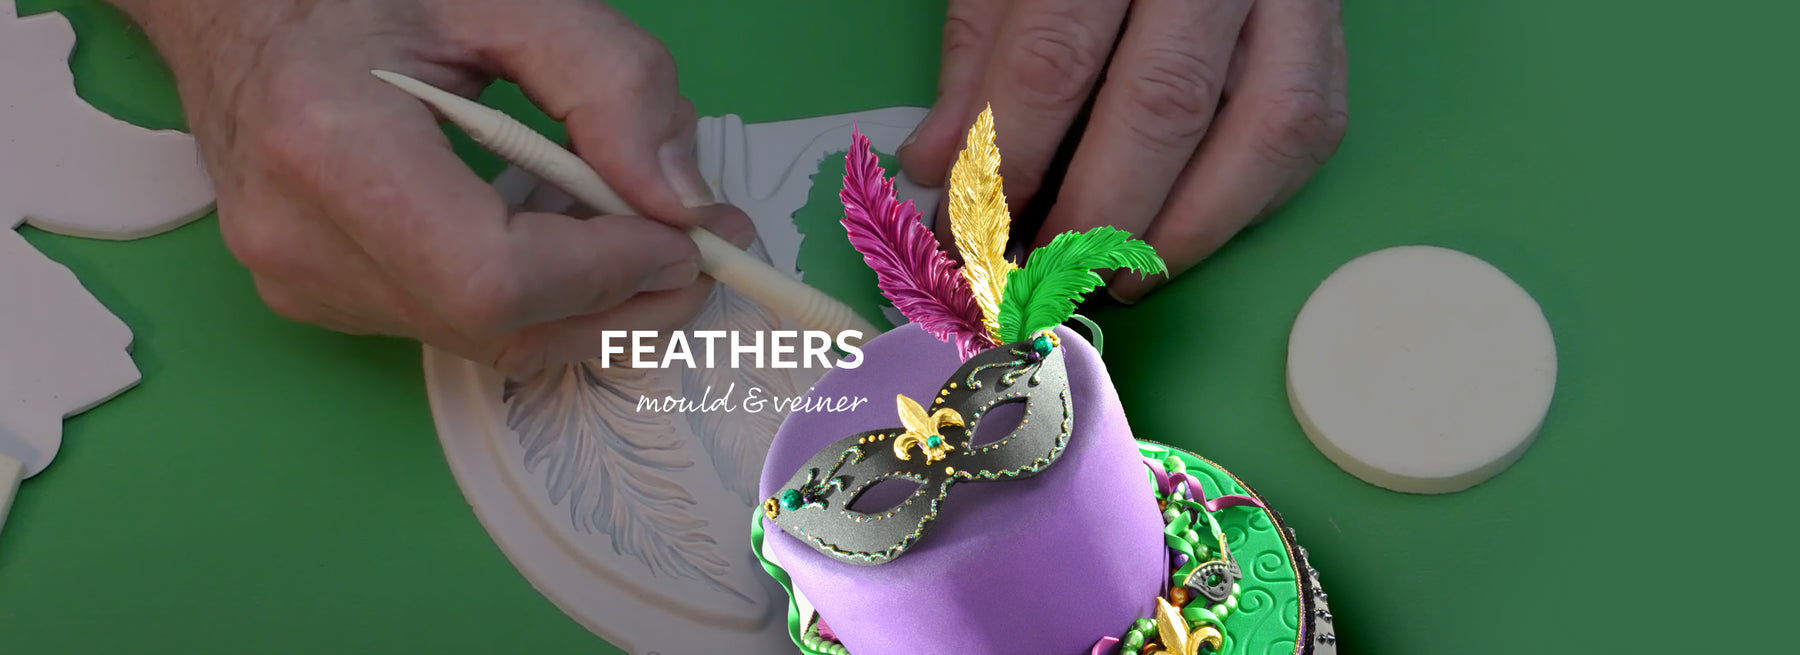 Wired feathers for cakes or crafts with Chef Nicholas Lodge